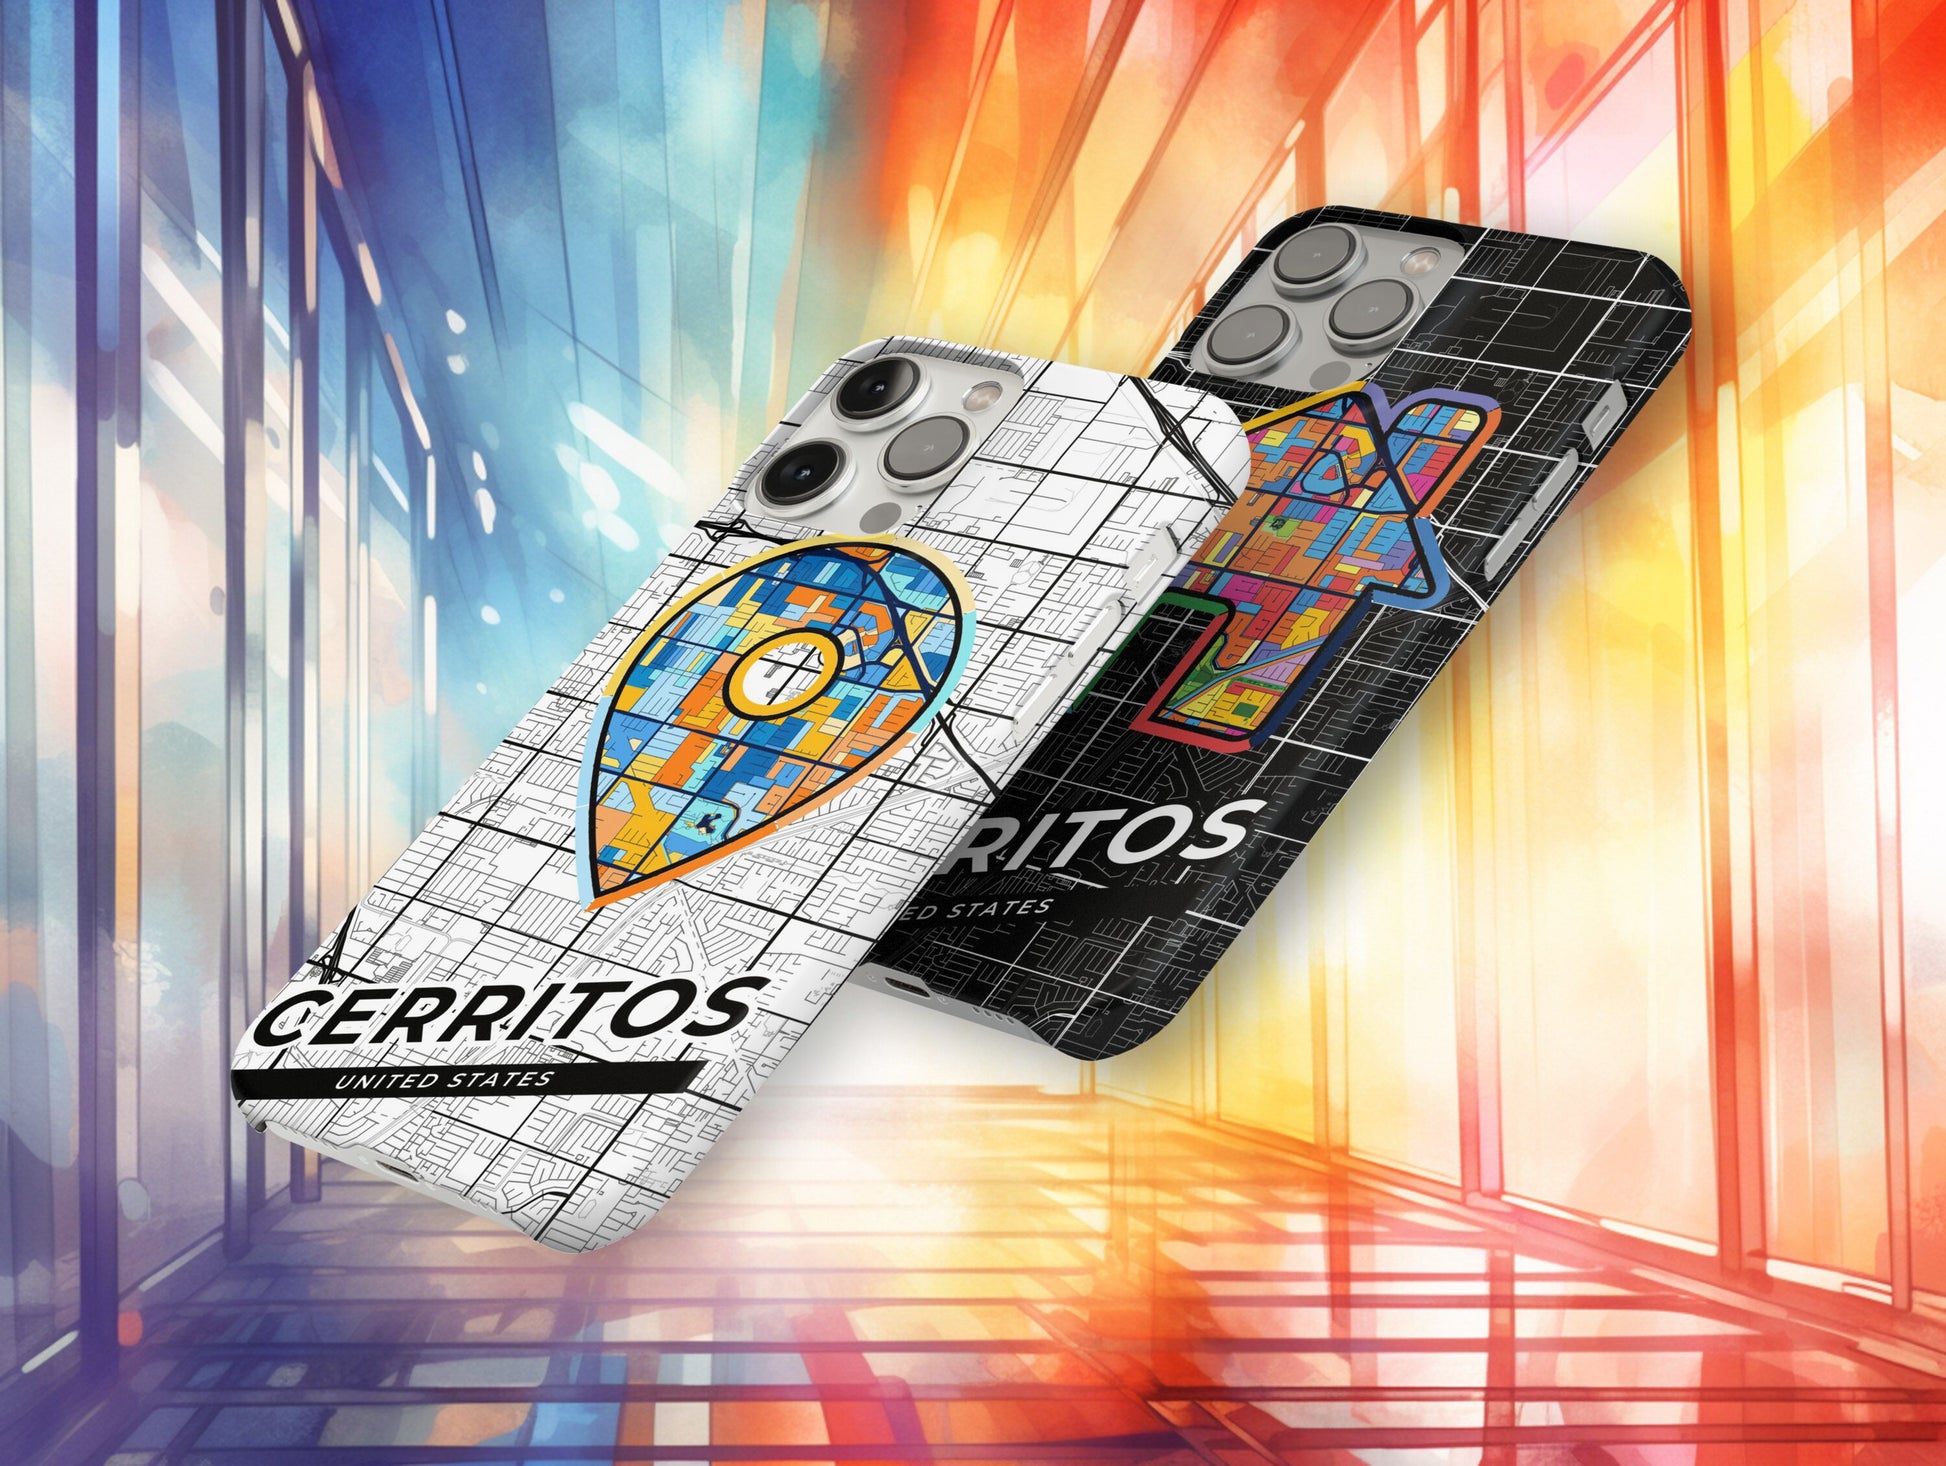 Cerritos California slim phone case with colorful icon. Birthday, wedding or housewarming gift. Couple match cases.